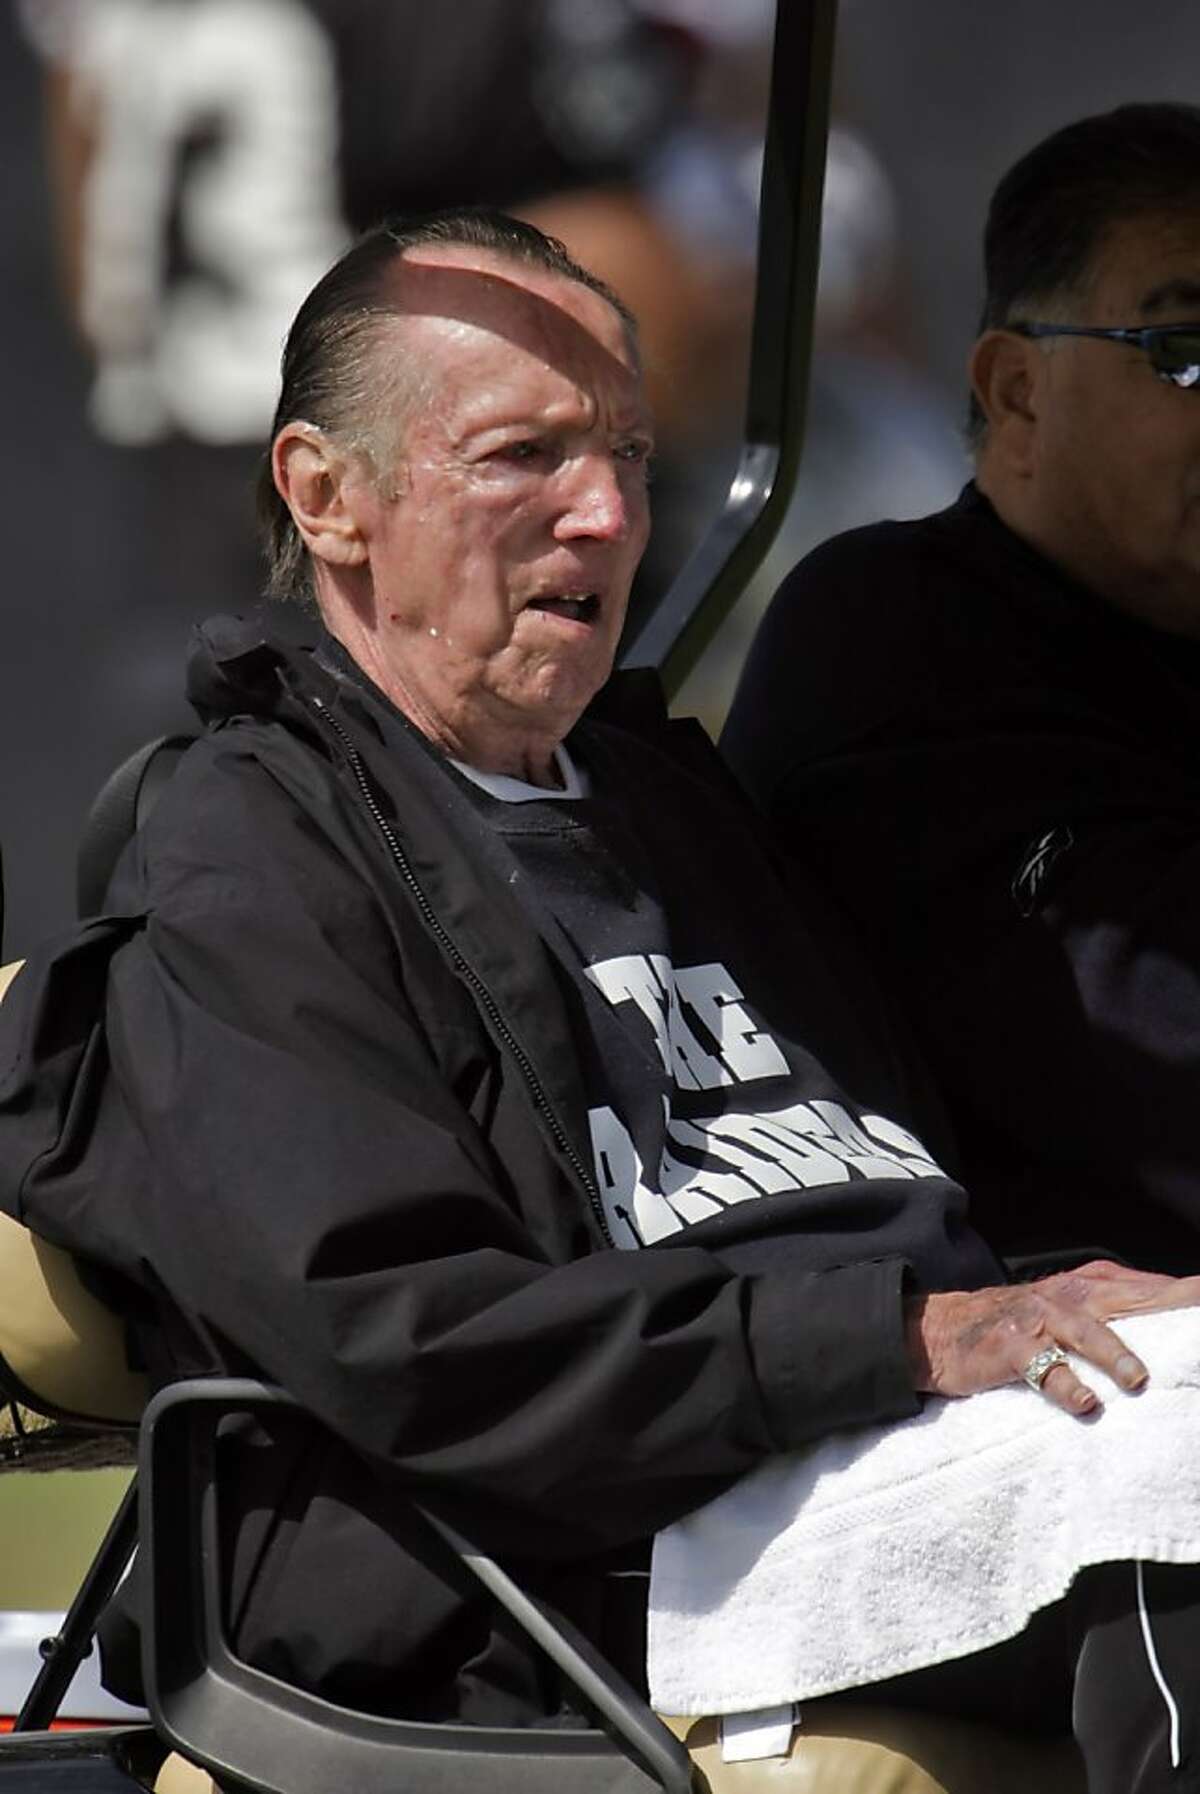 Raiders owner, Al Davis, leaves the field after practice at the Raiders training camp.